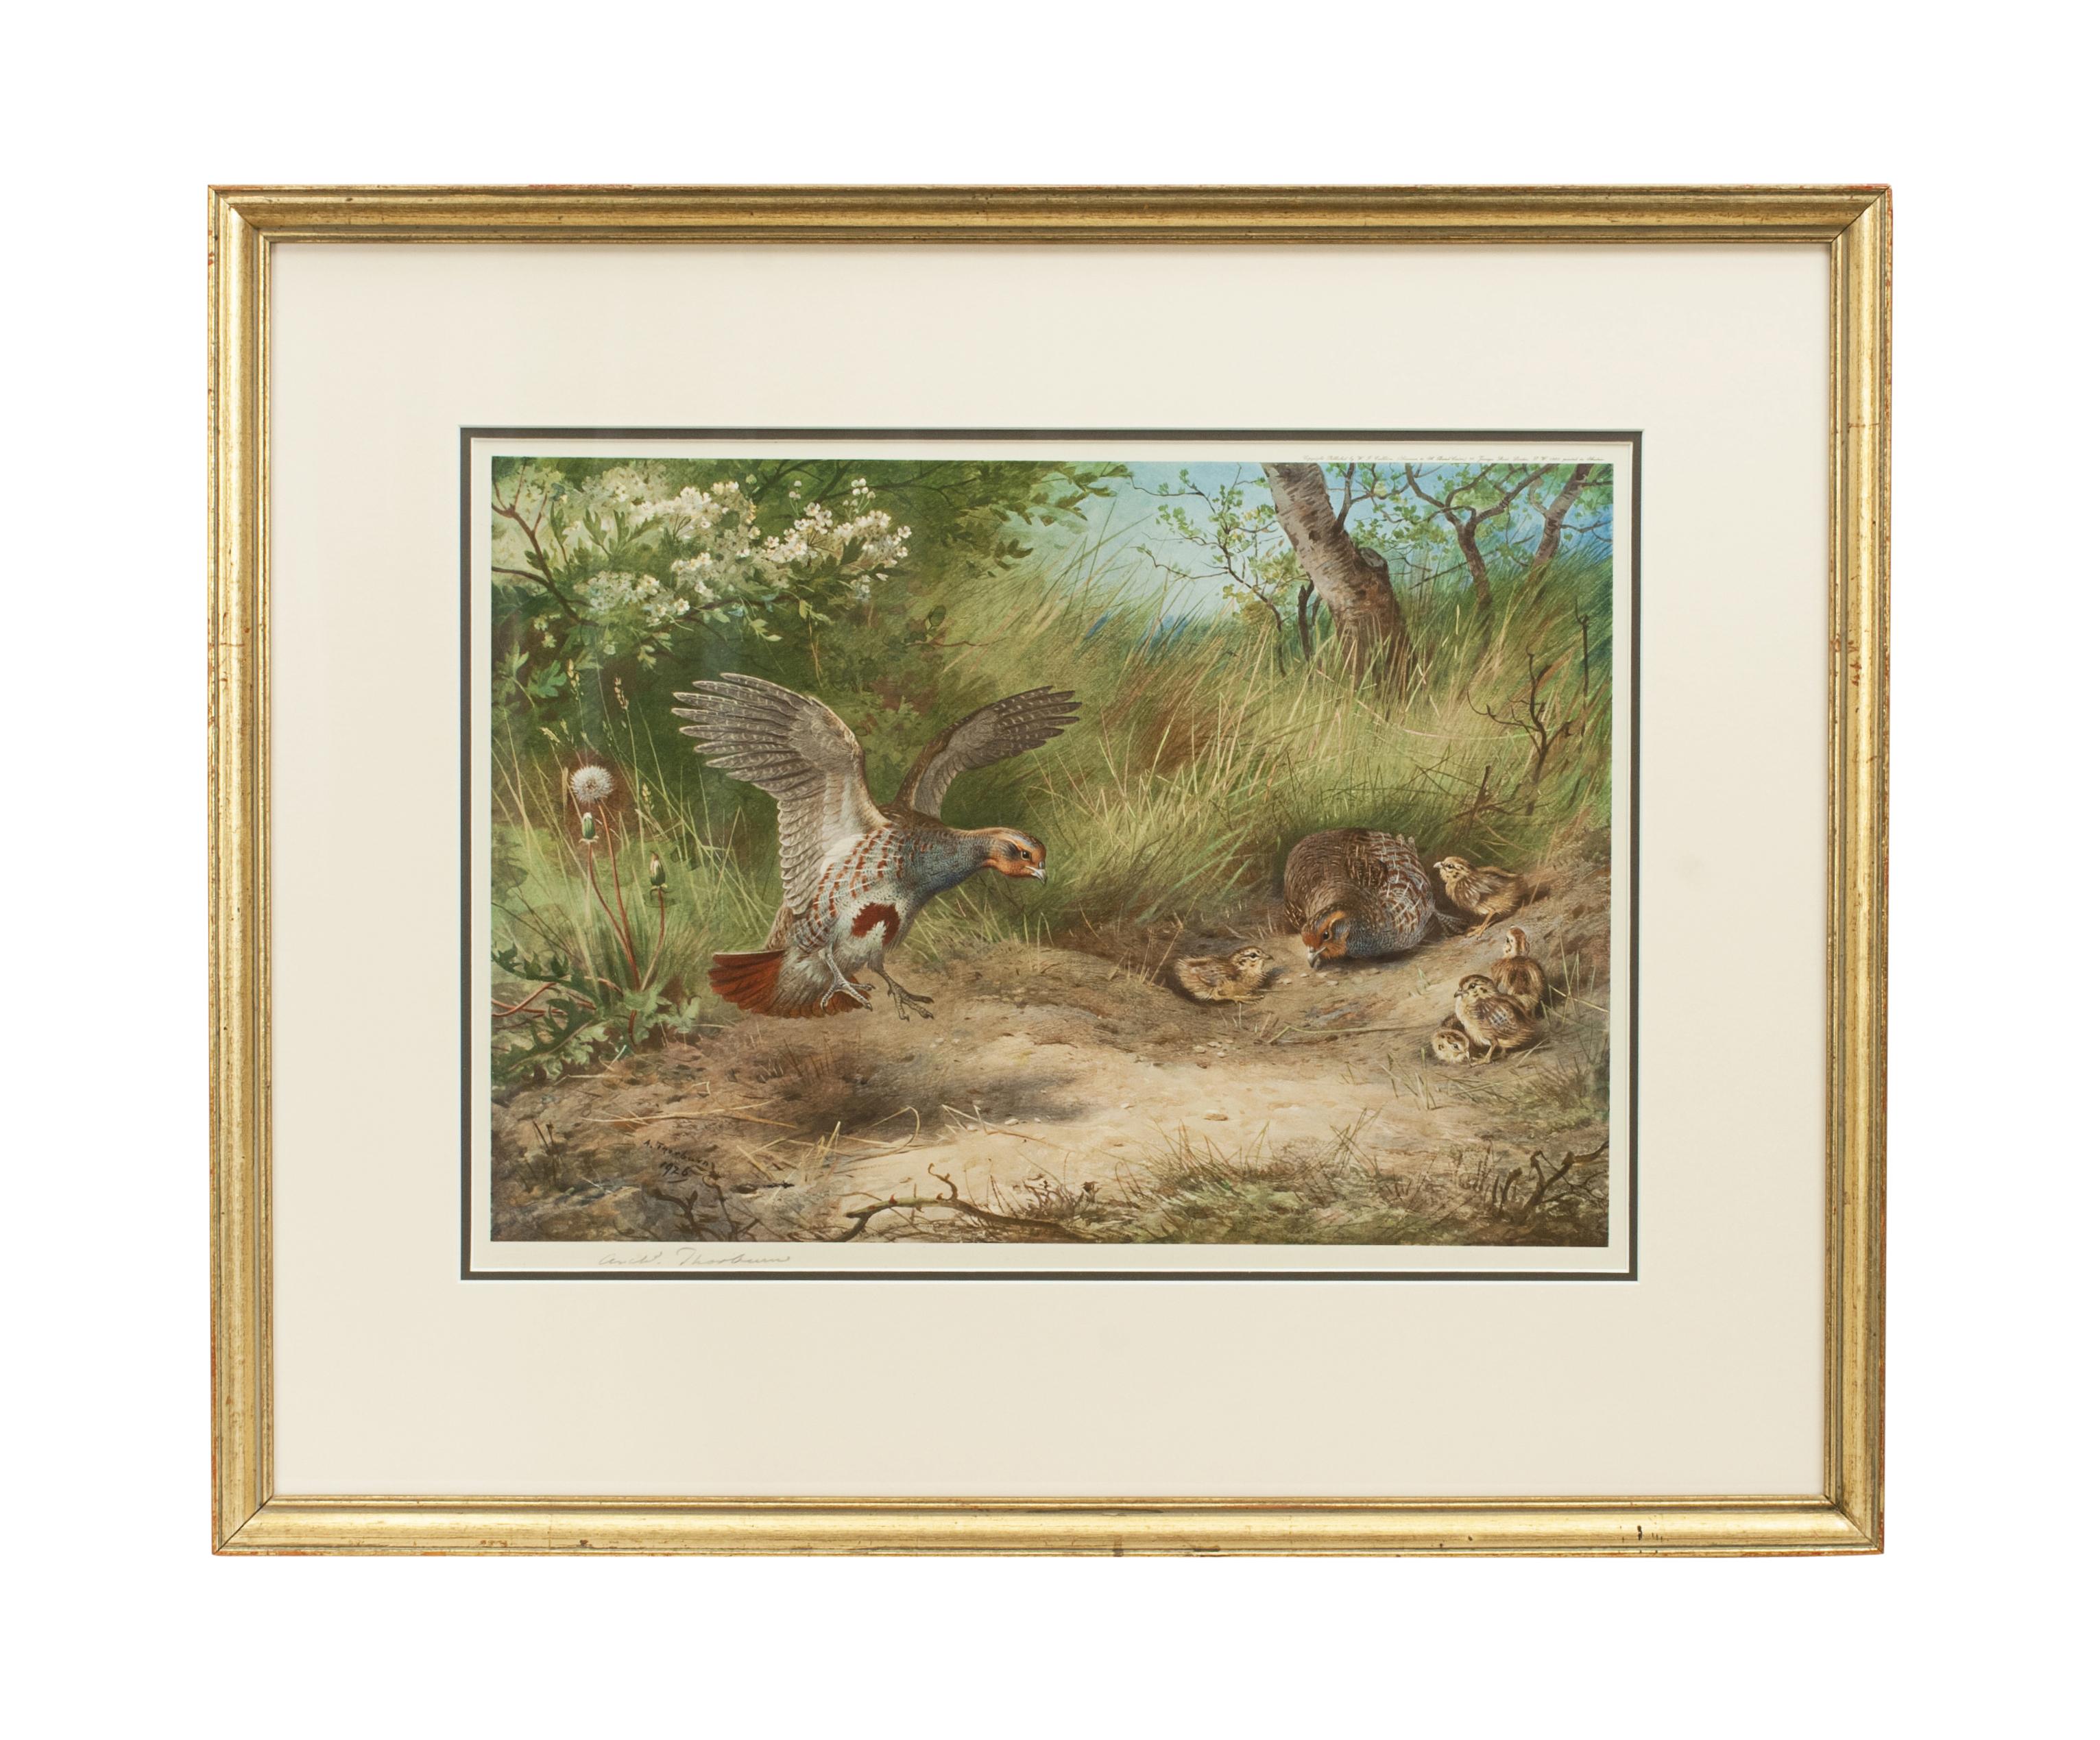 Signed Artist Proofs, The Seasons by Archibald Thorburn.
A set of four game bird colotypes by Archibald Thorburn, titled 'The Seasons'. Each bird represents a season, Partridge - Spring, Pheasant - Autumn, Grouse - Summer, Black Game - Winter. All